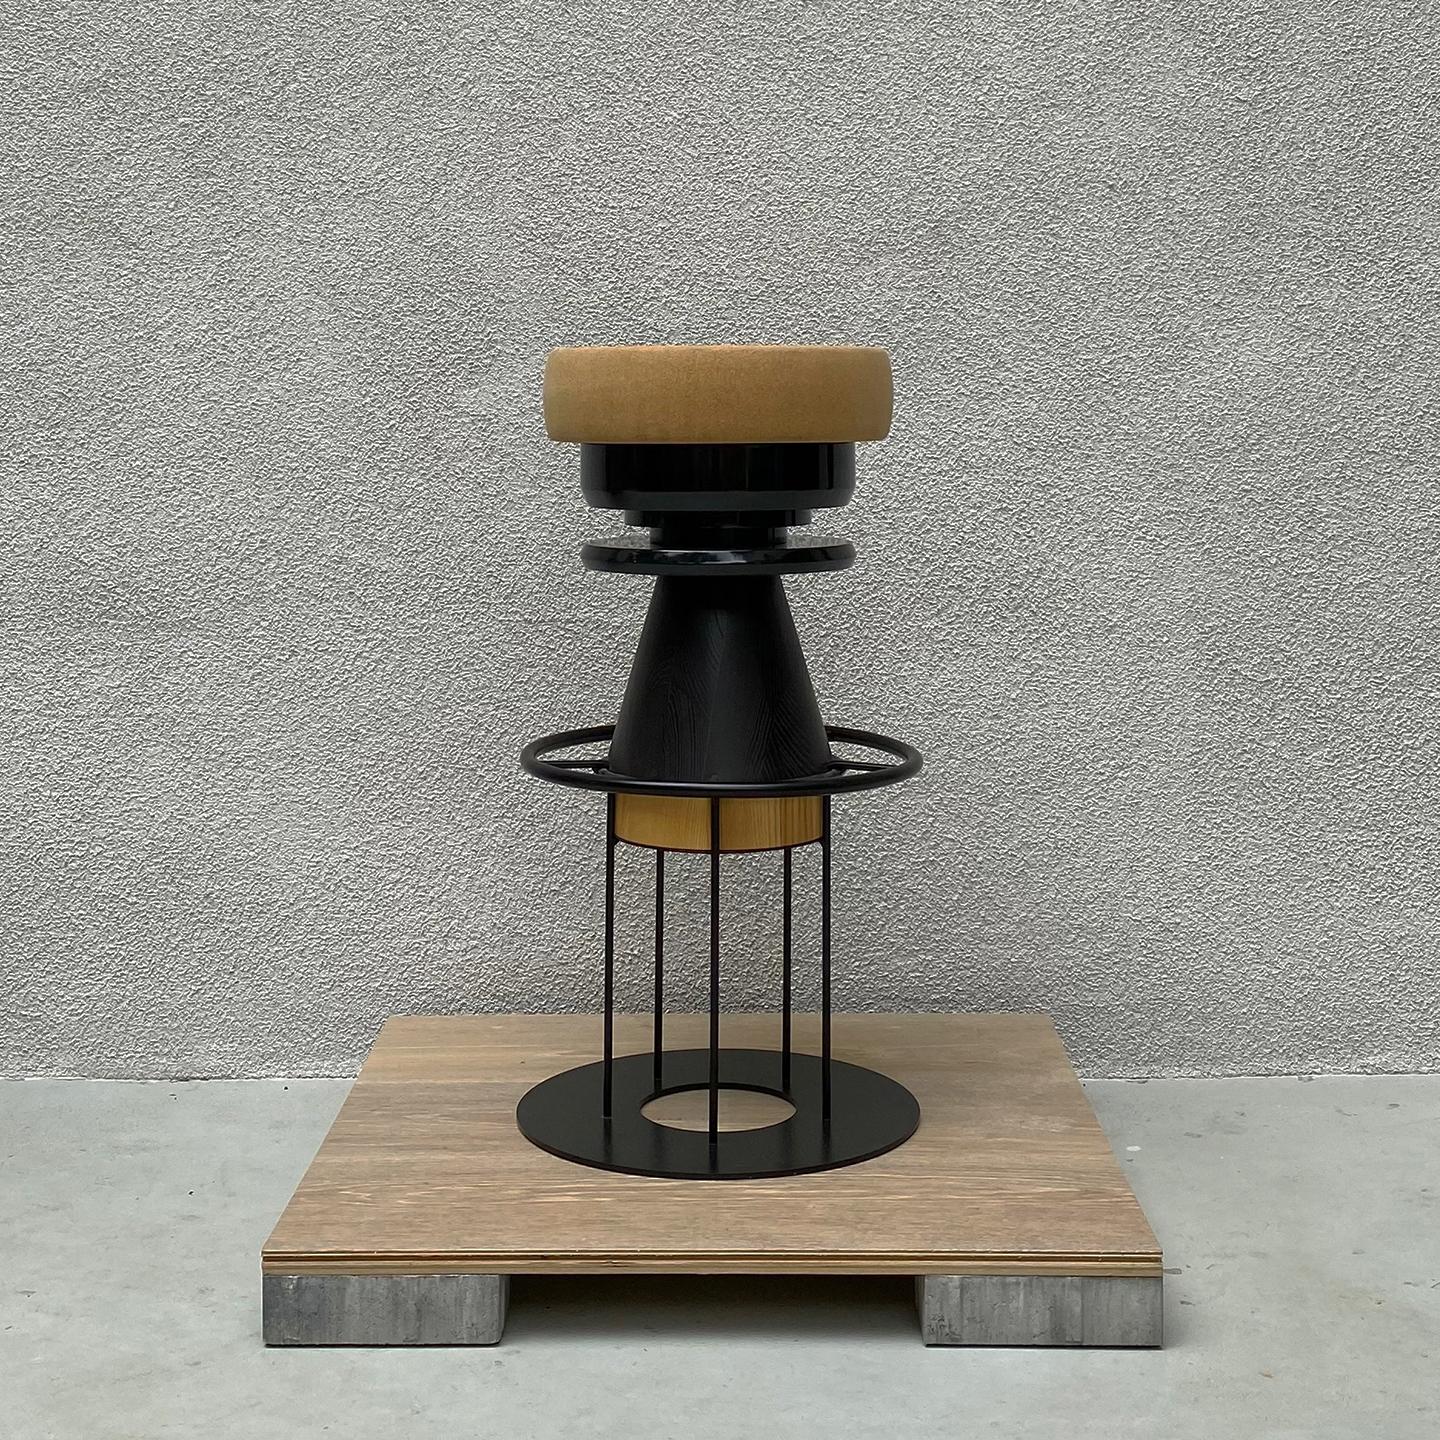 Tembo is a sculptural stool that combines a wood metal body with a solid cork seat. The designers drew their inspiration both from the African tam-tams -Tembo means elephant coot in swahili- and give a nod to the Memphis group of the 80s aesthetics.